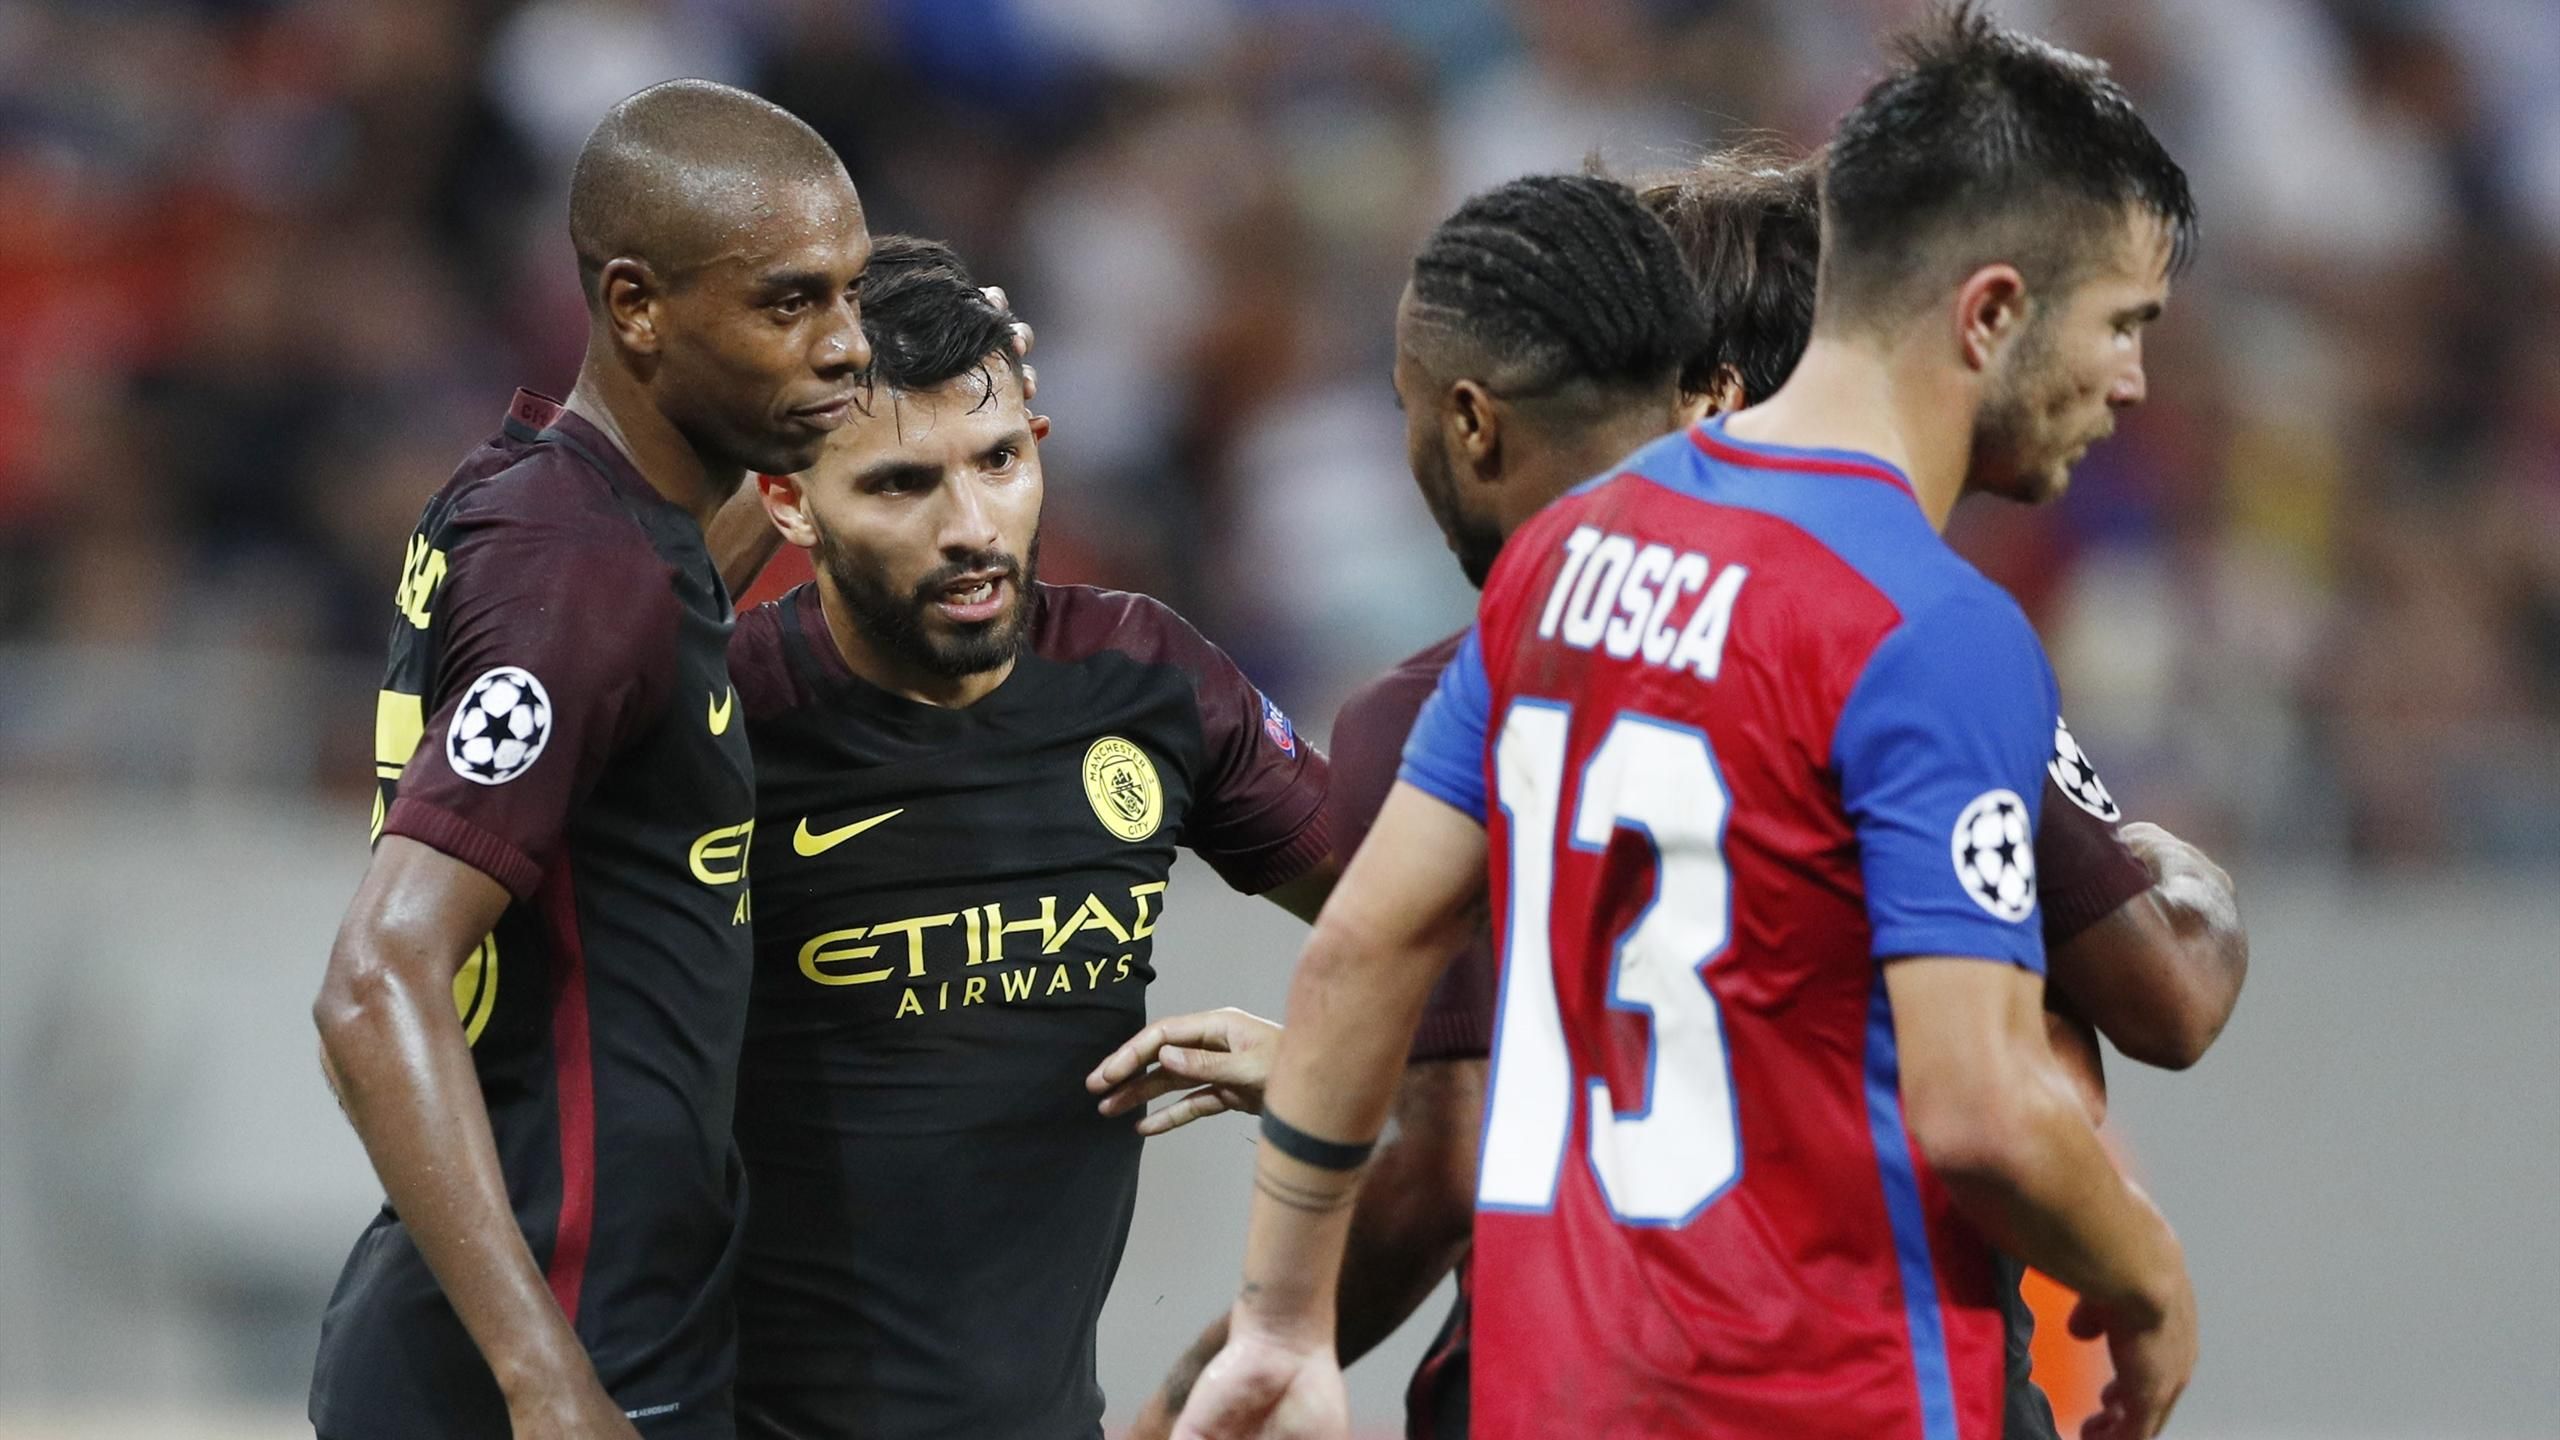 There are no easy games - Sergio Aguero issues interesting take on UEFA  Champions League fixture between Liverpool and Real Madrid